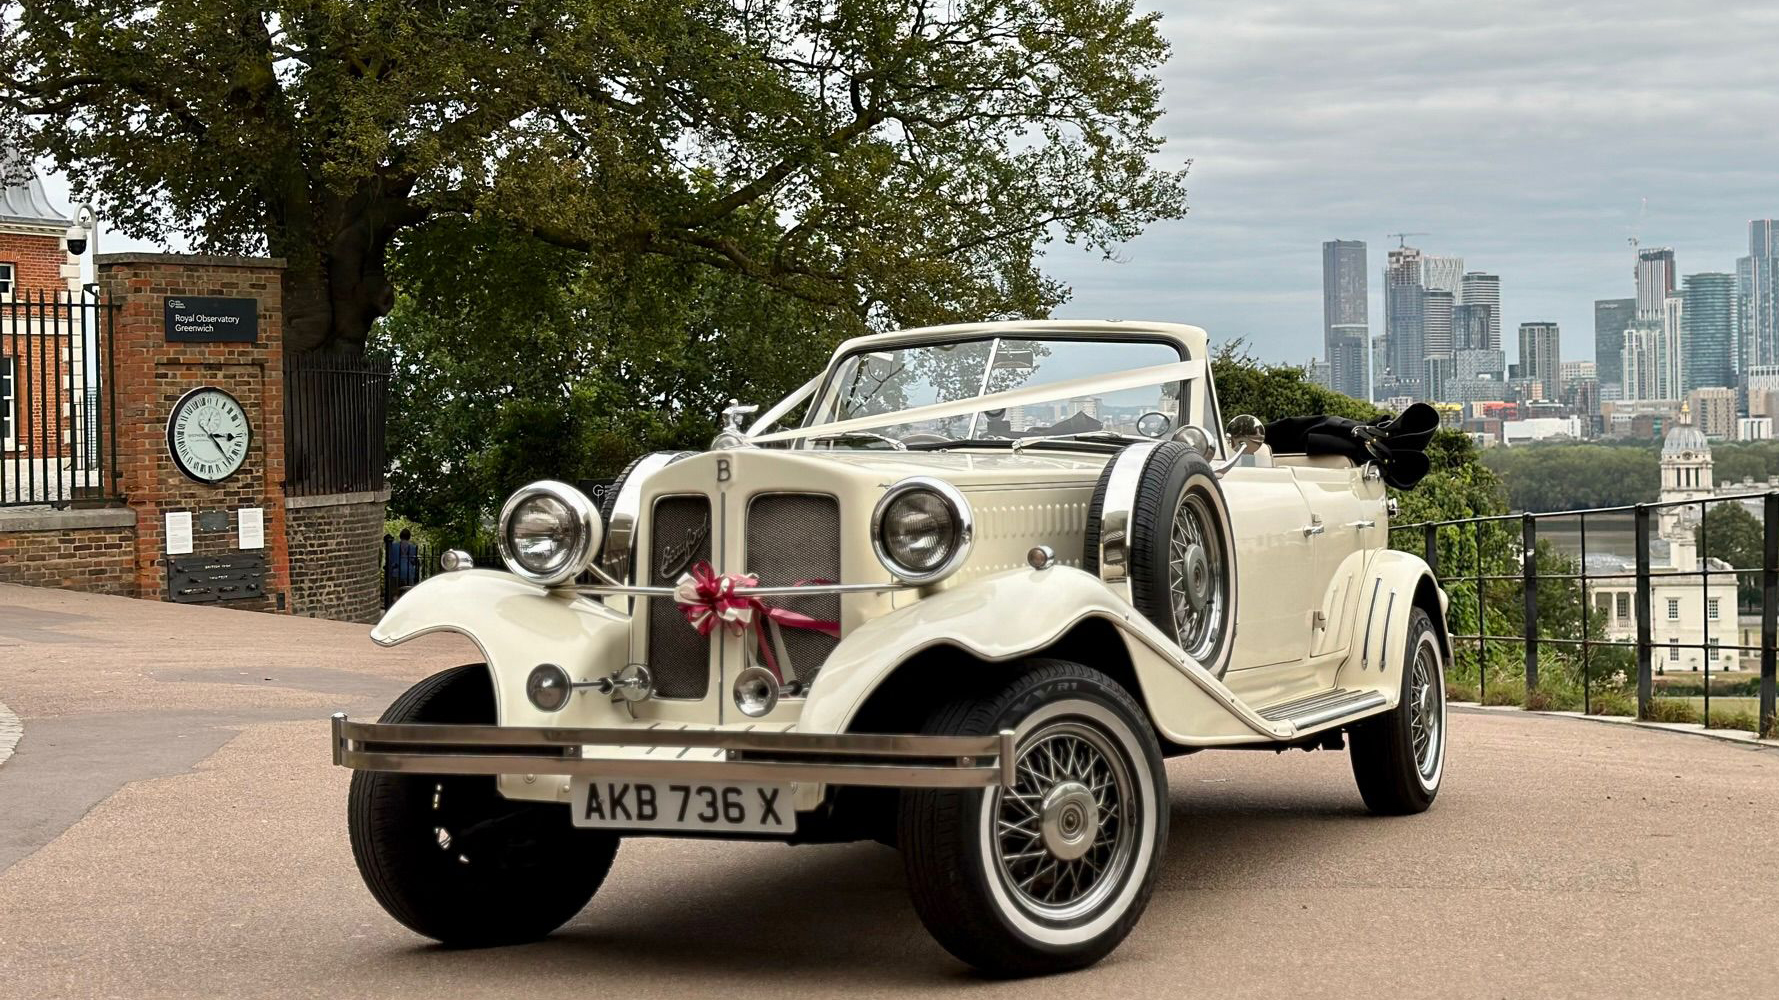 Beauford 4-Door Convertible wedding car for hire in Ilford, London